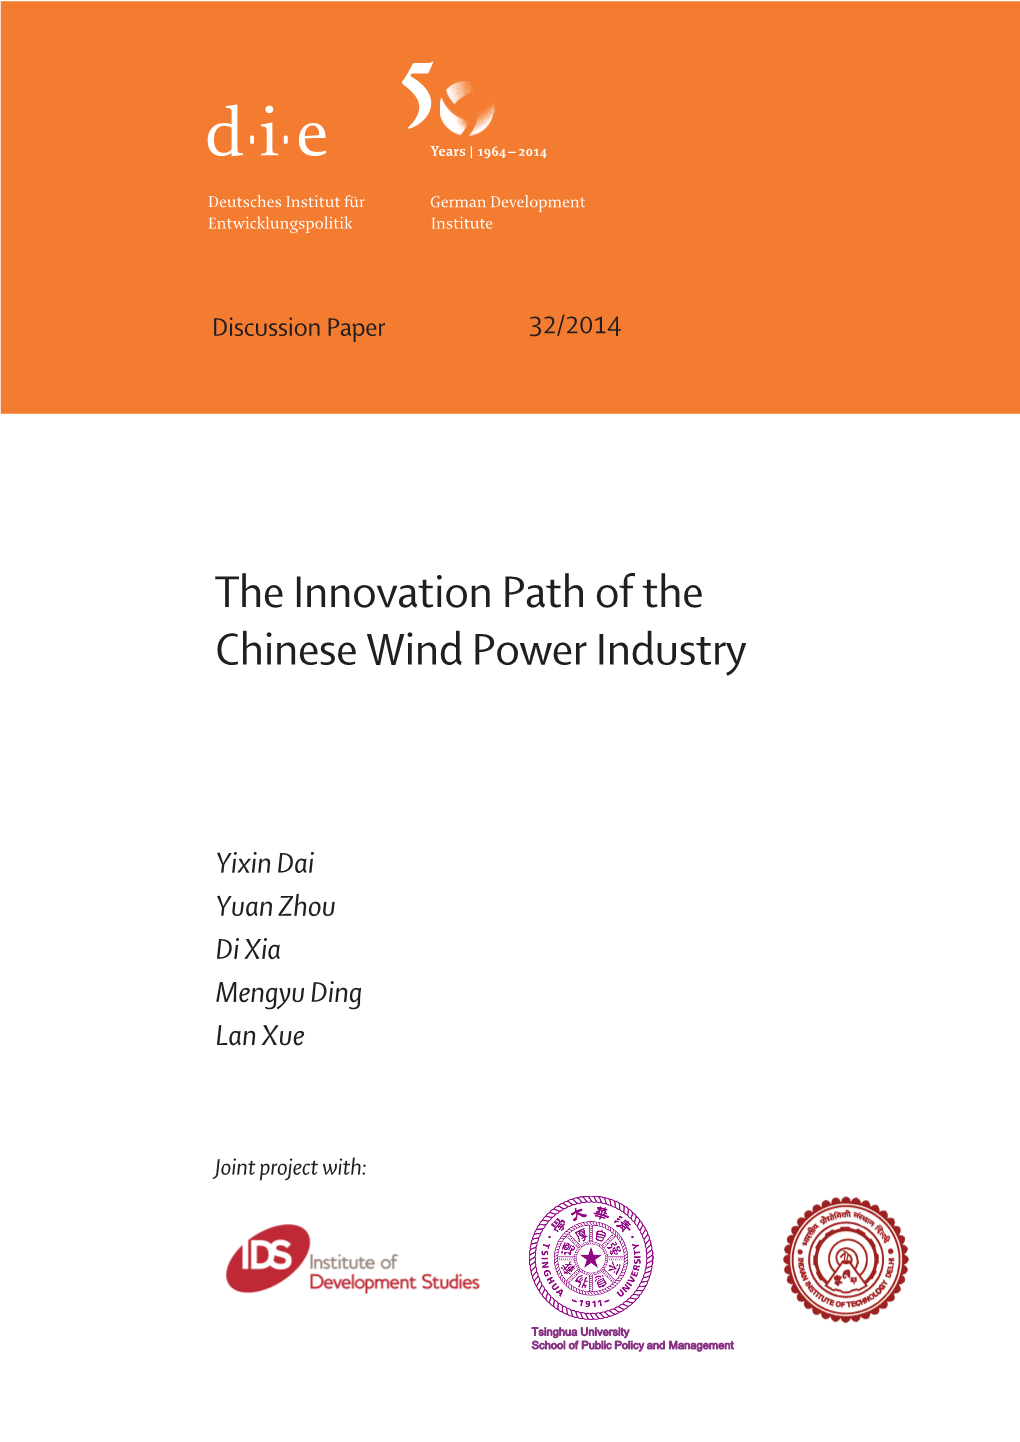 The Innovation Path of the Chinese Wind Power Industry